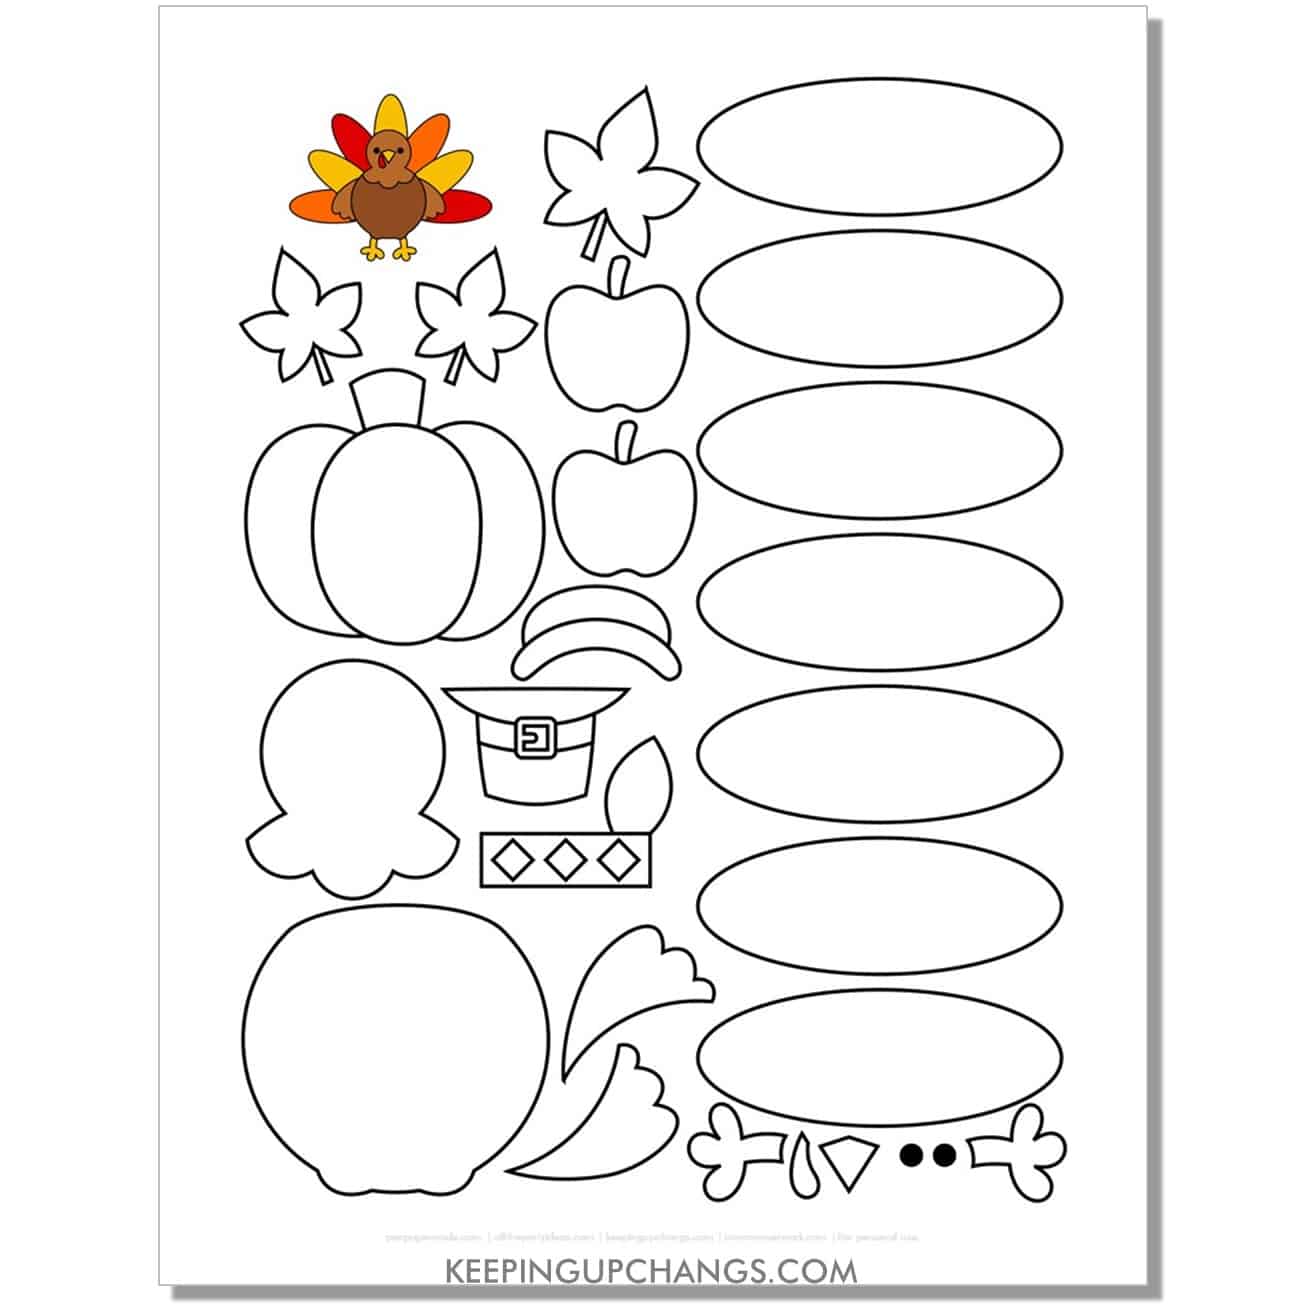 easy build a turkey template for kindergarten with feathers, body, hat, accessories in black and white.